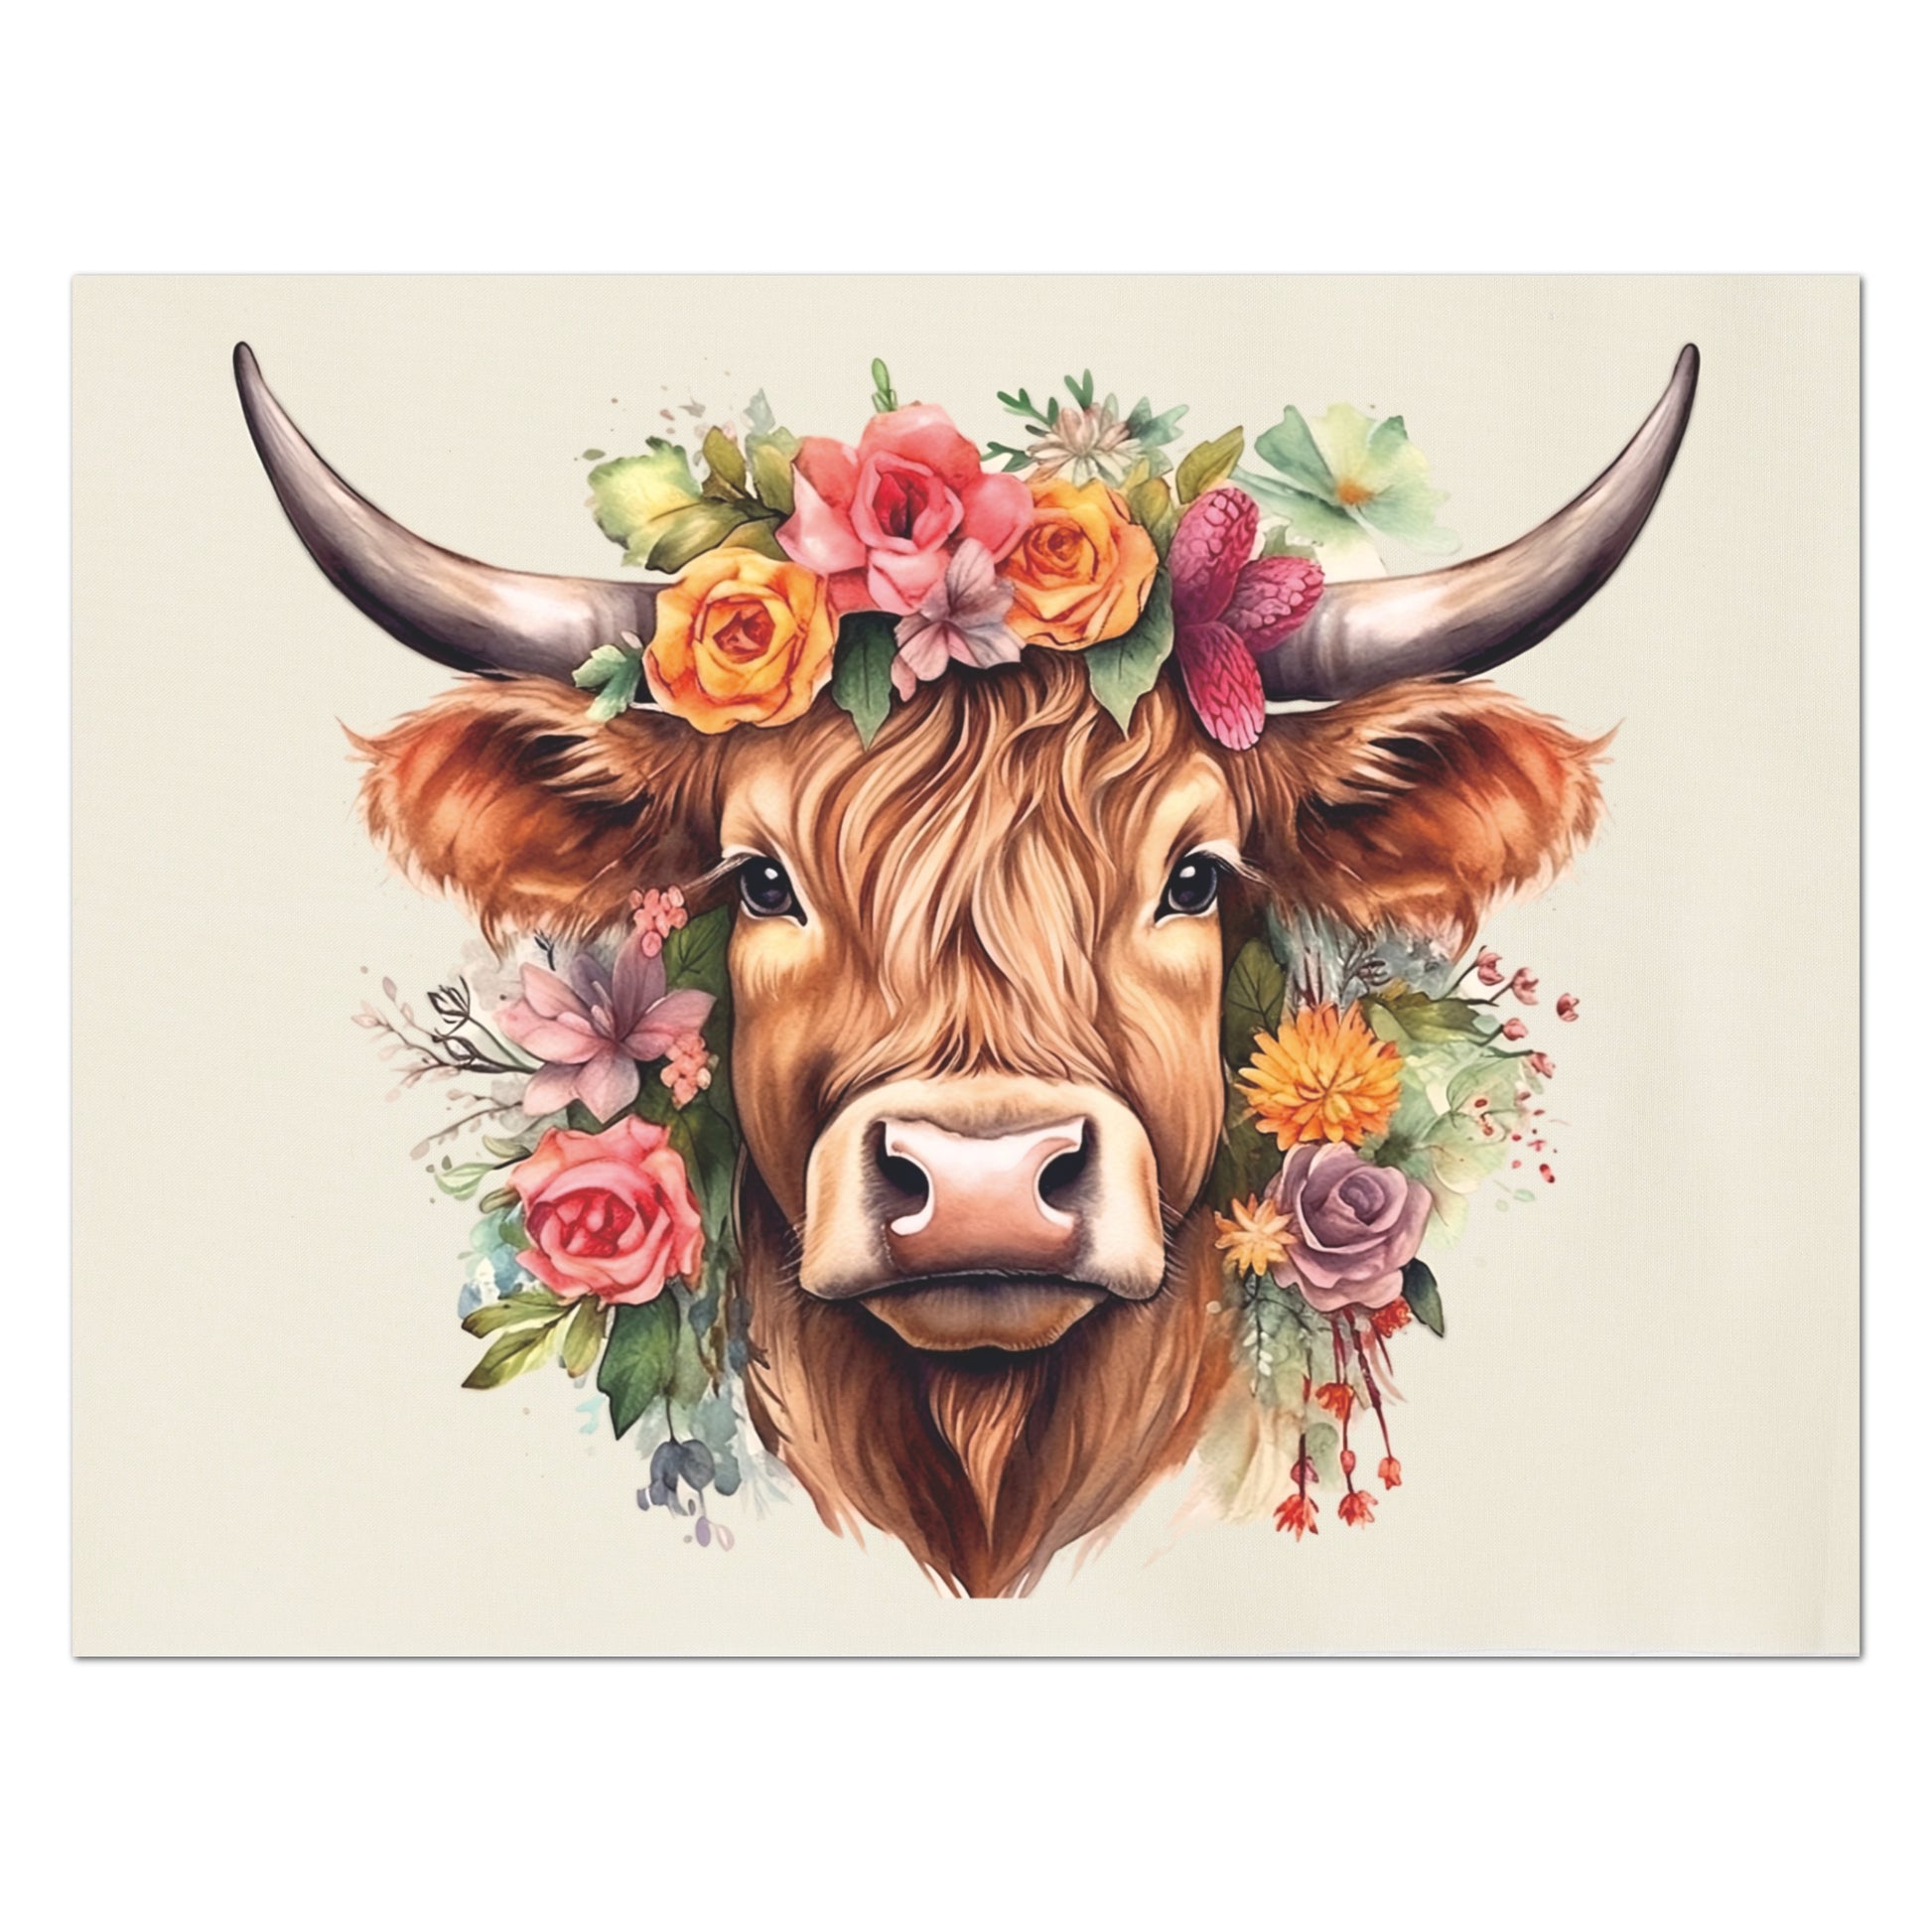 Highland Cow Print, Floral, Flower, Quilt, Quilting, Sewing, Crafts, Home Decor, Wall Art